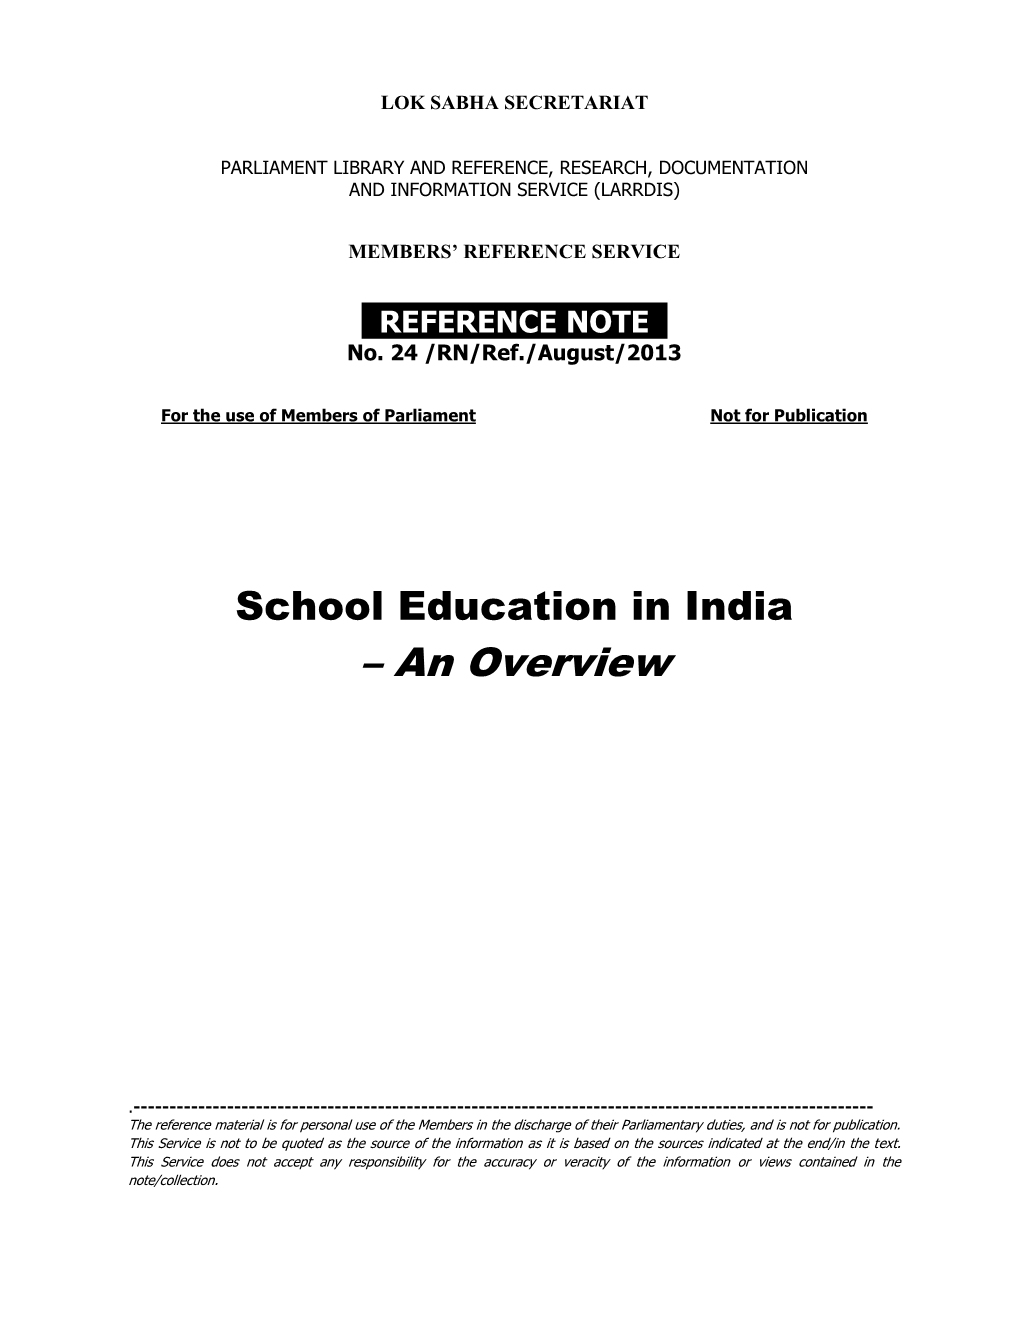 School Education in India – an Overview